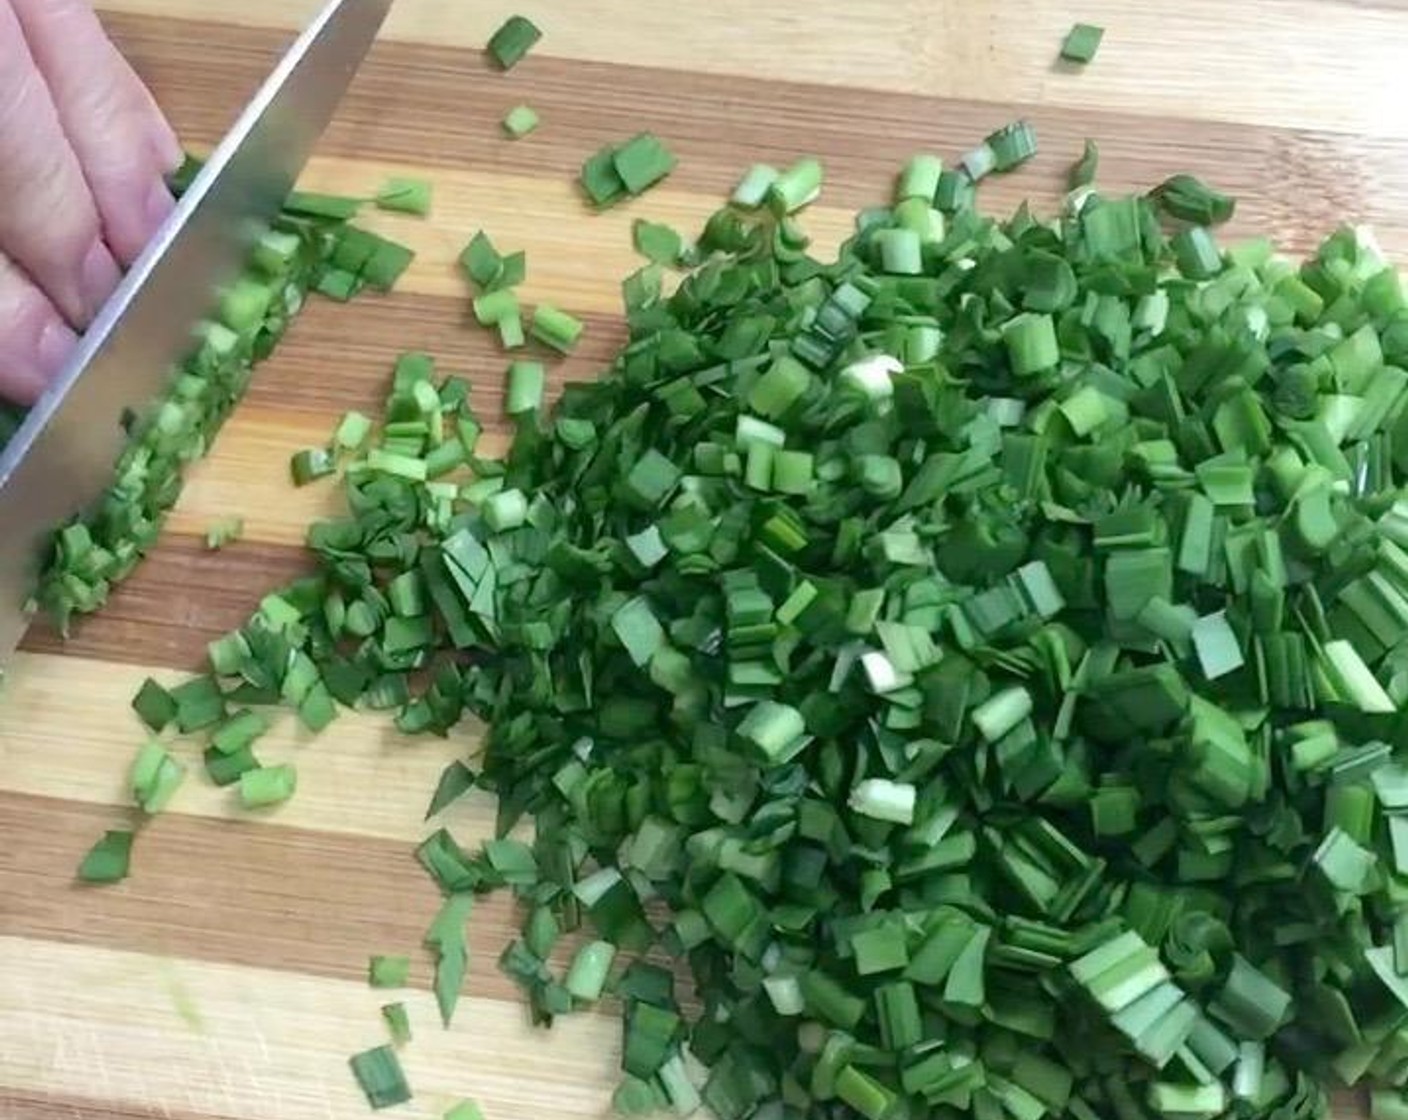 step 1 Start by preparing the filling. Wash thoroughly the fresh Chinese Chives (5 cups) and drained welling a colander. Trim off the white part at the bottom of chives. Then cut the chives into 1/2 cm long pieces. Then set aside.